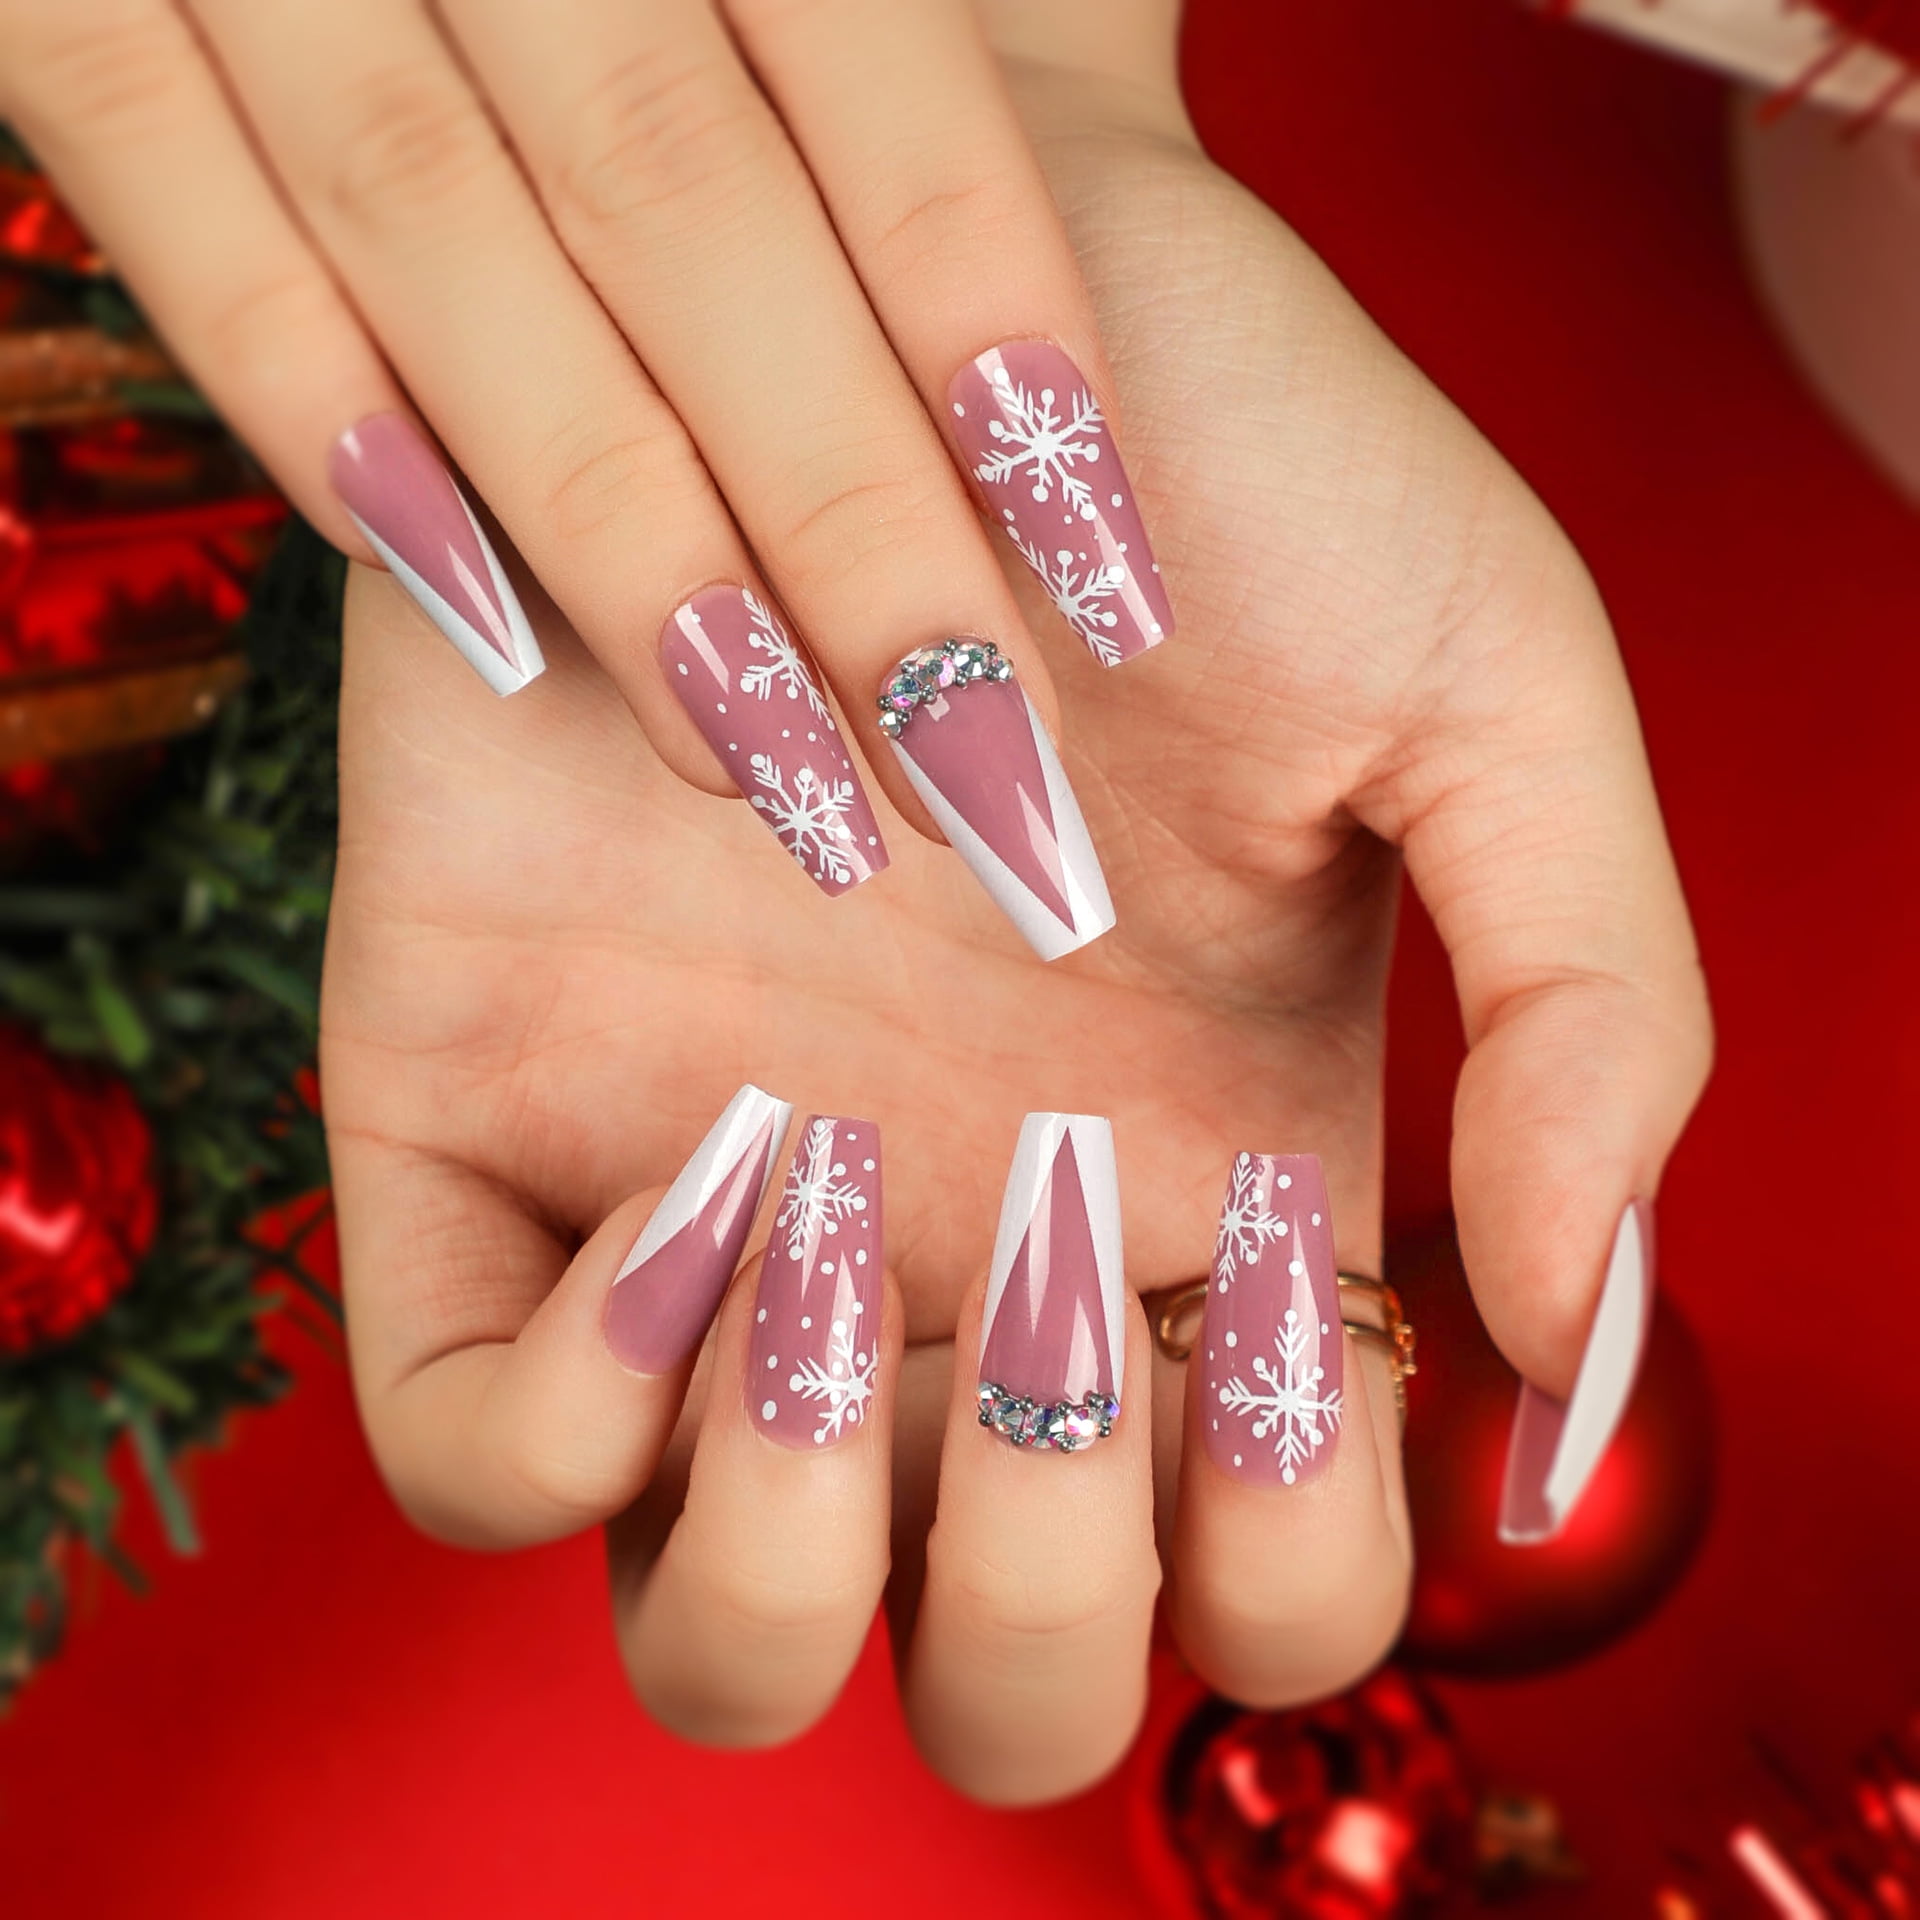 Best French Nails Art Designs And Styles You Must Try On Your Nails